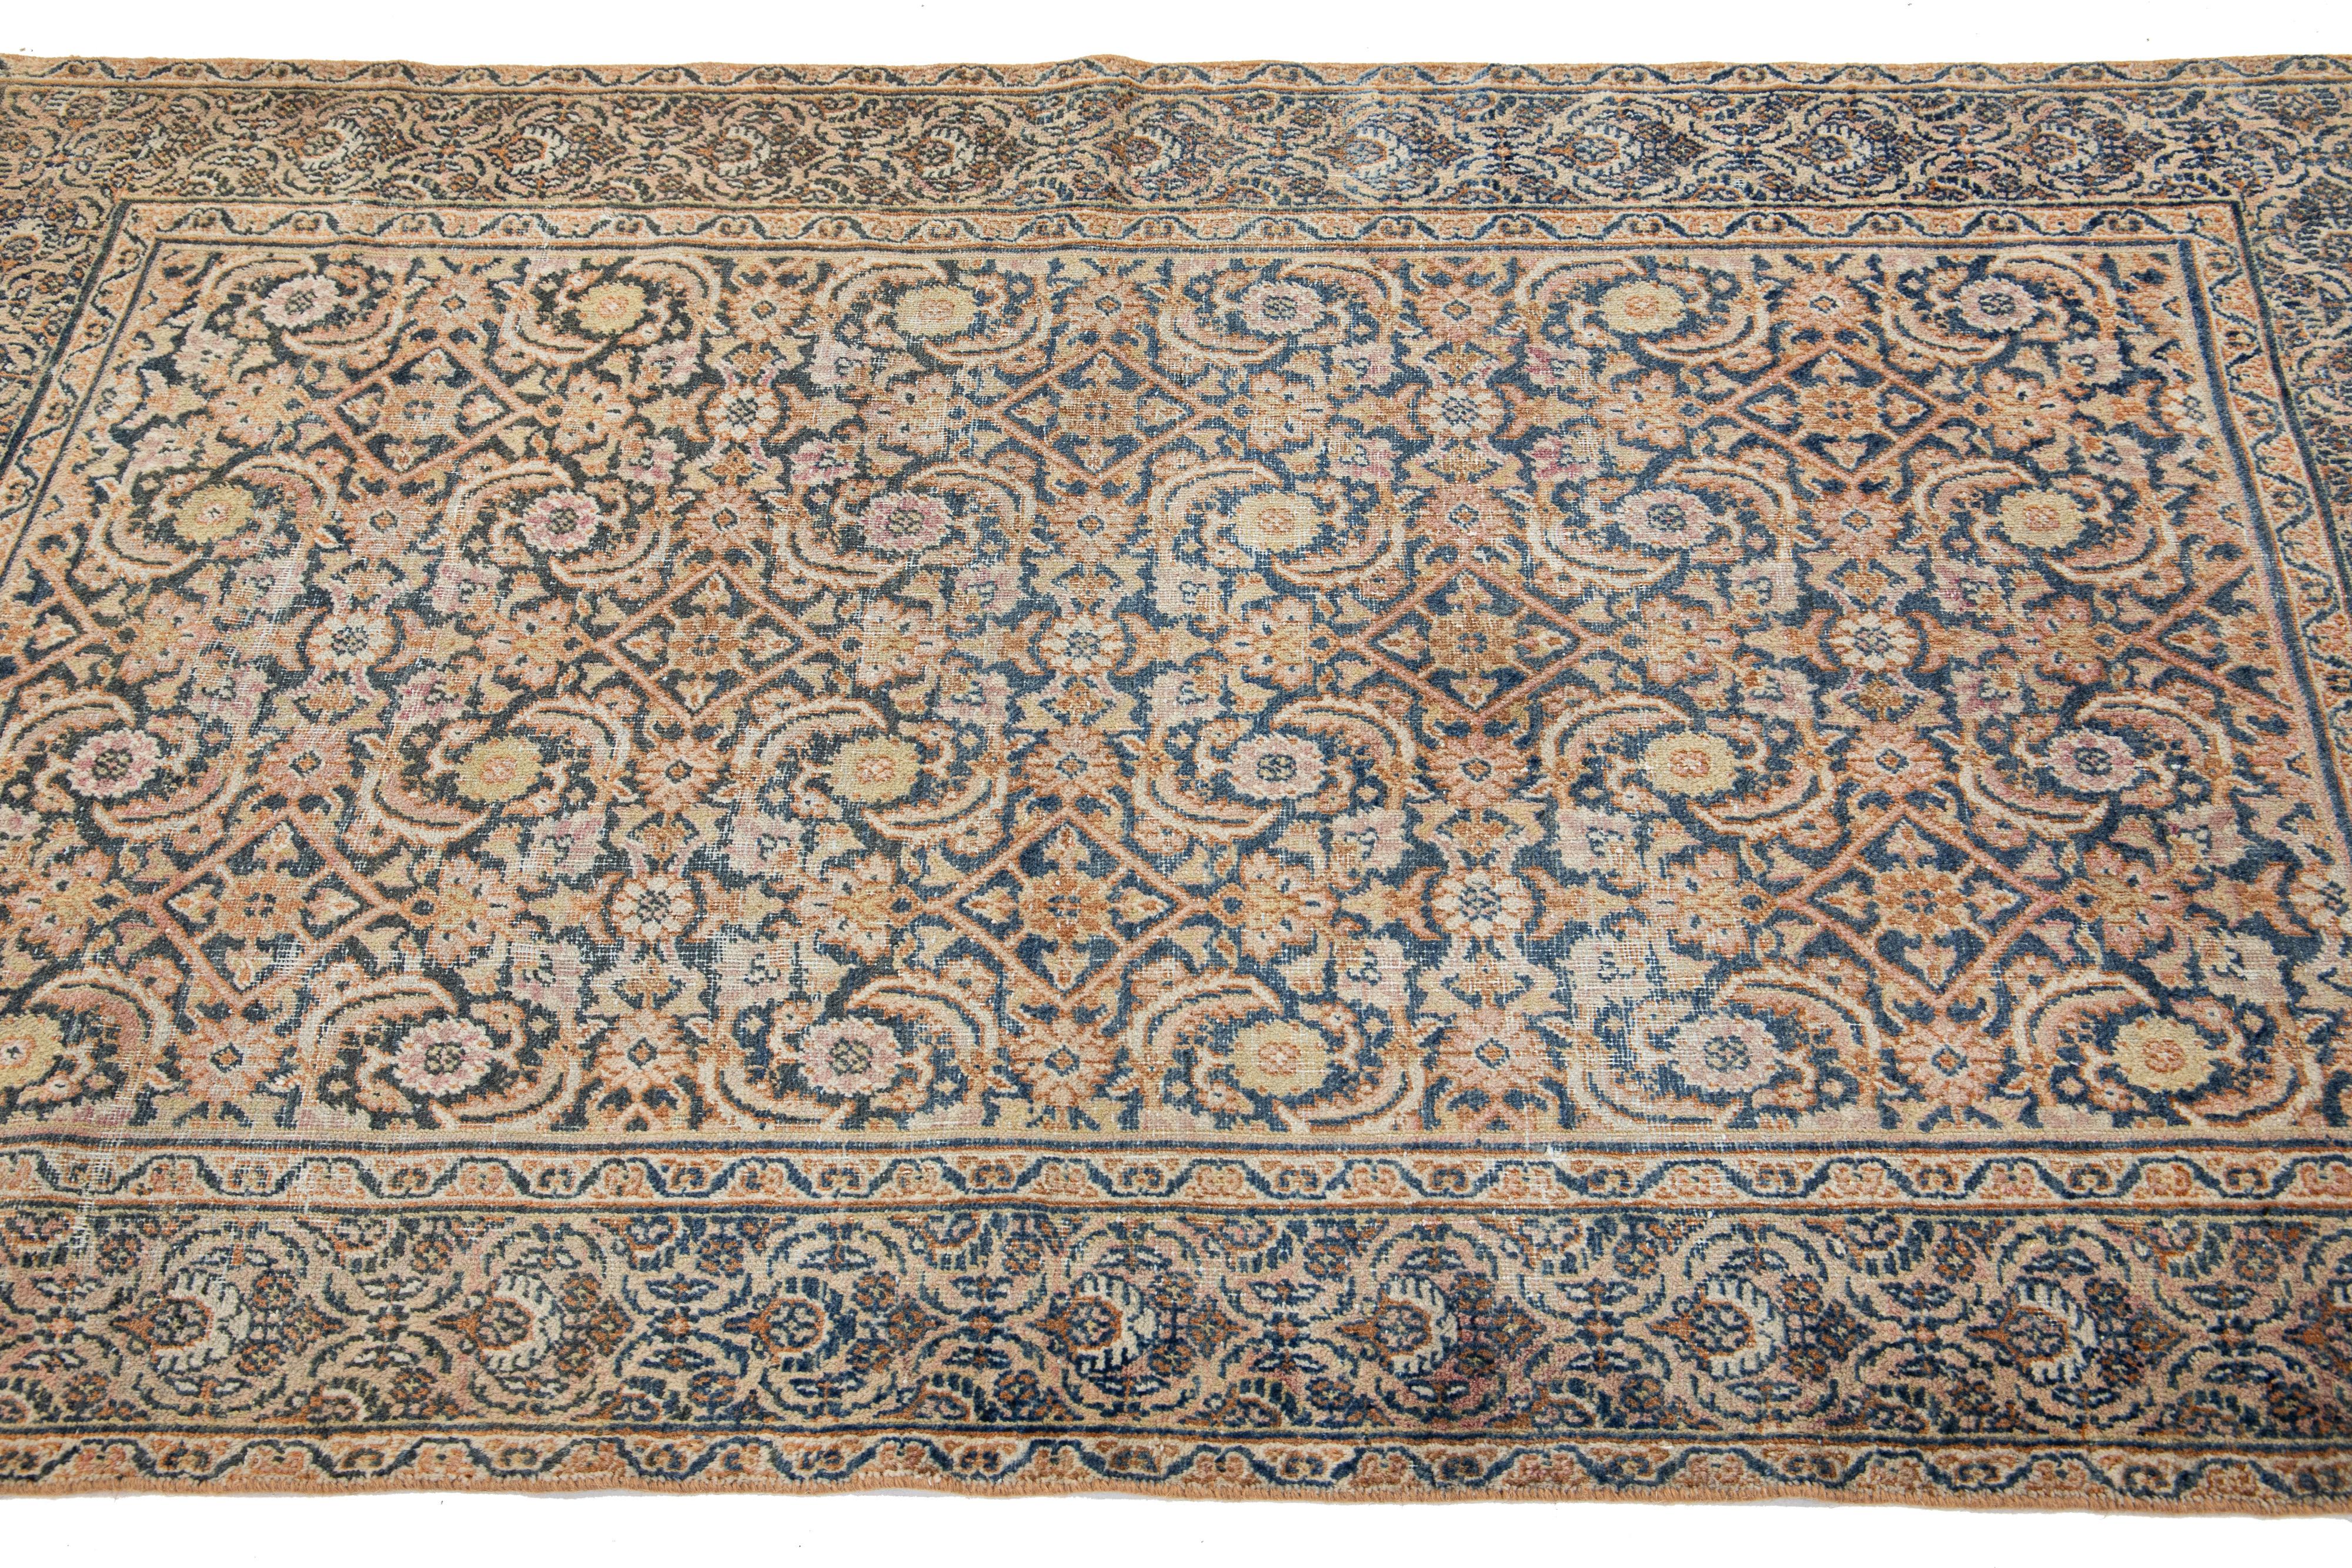 Blue Antique 1920s Persian Tabriz Wool Rug With Floral Pattern  In Good Condition For Sale In Norwalk, CT